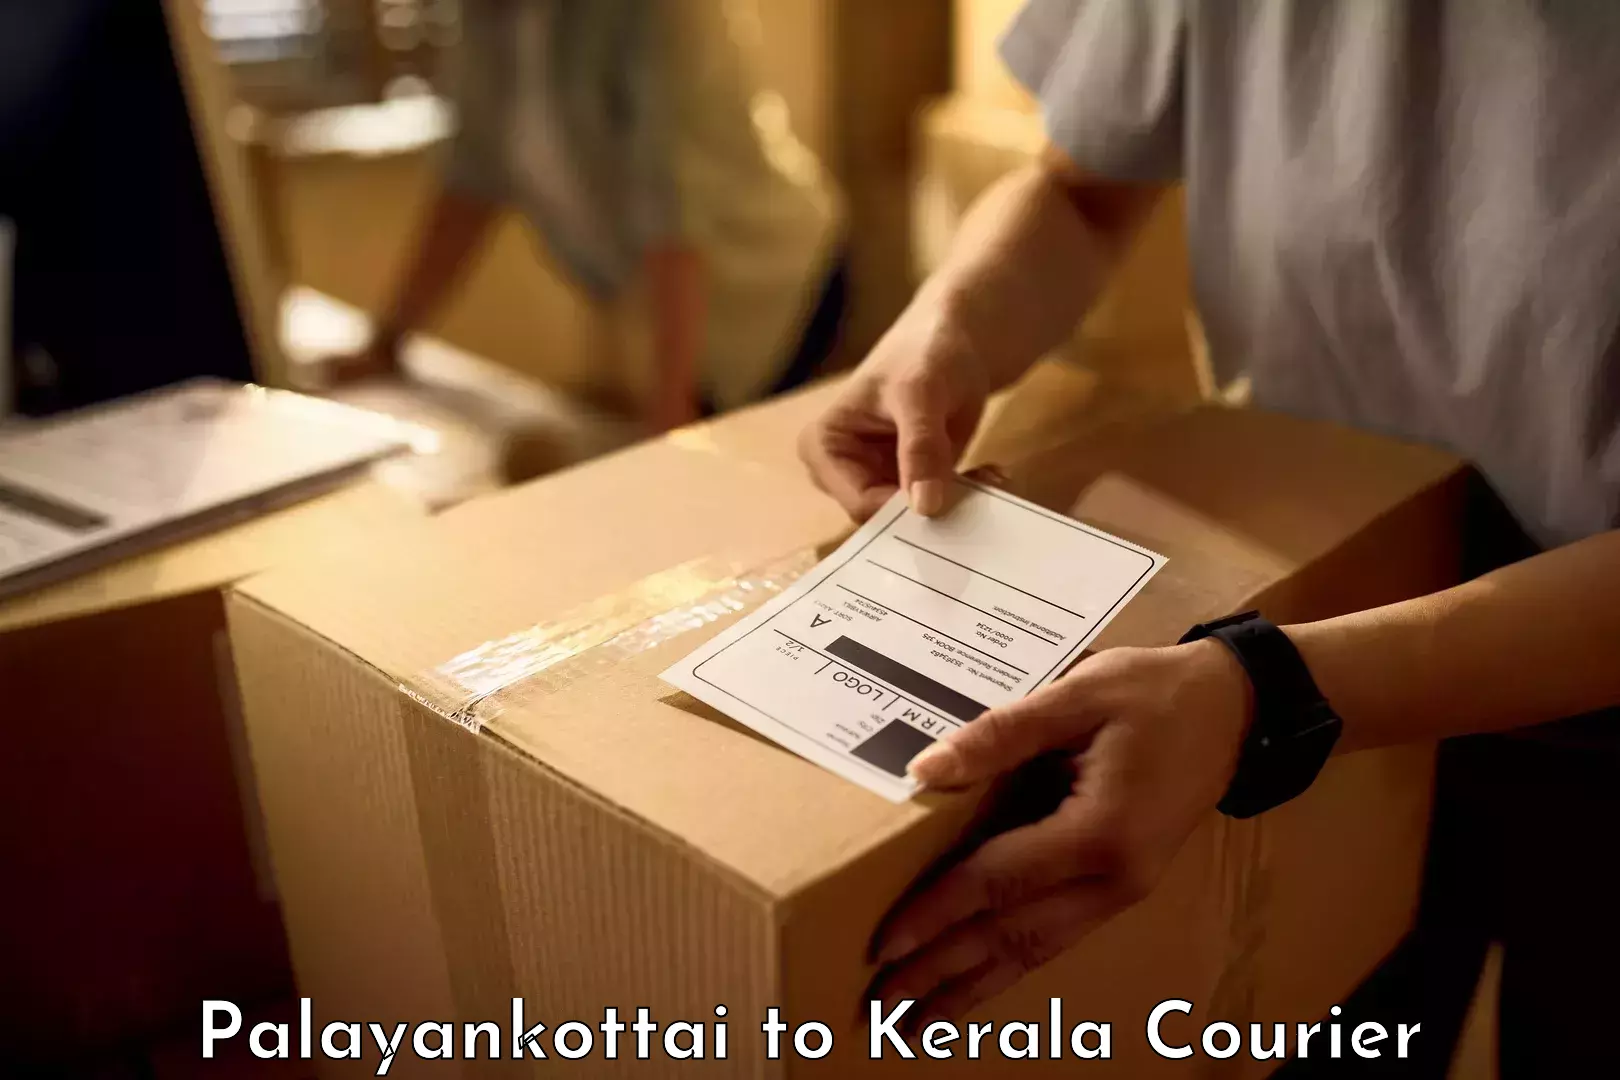 Luggage delivery system Palayankottai to Kerala